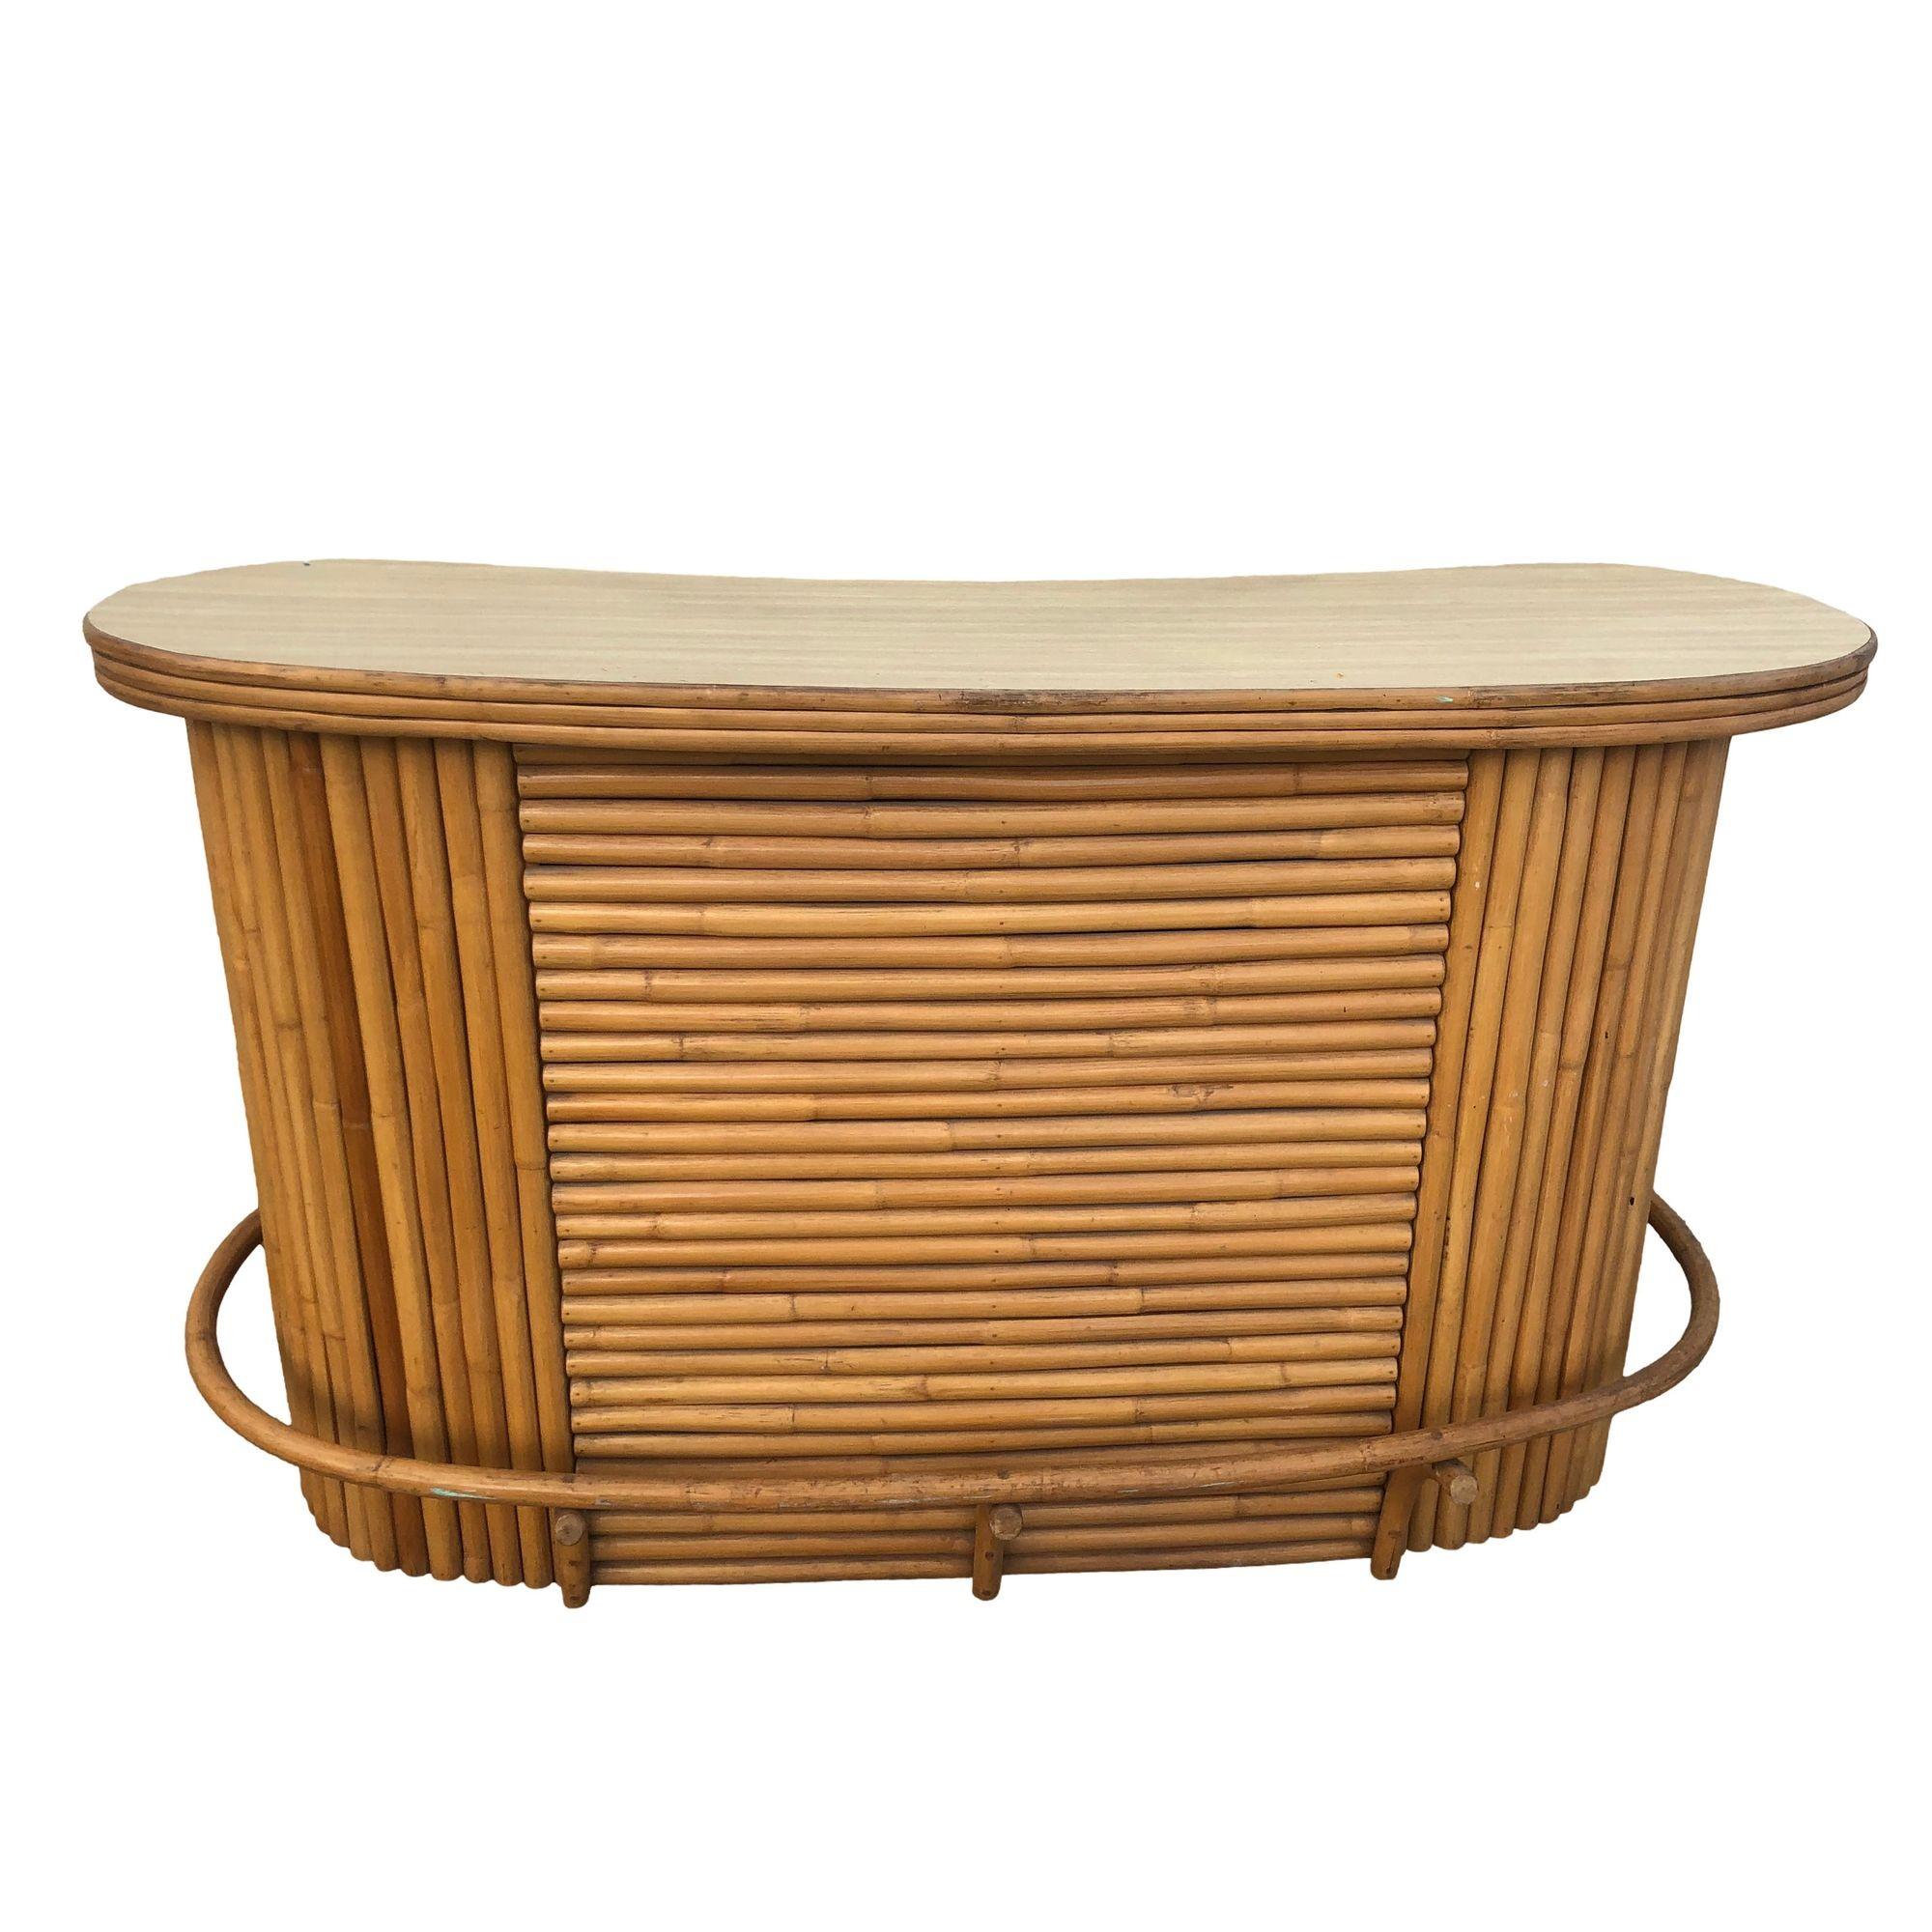 Experience vintage charm with our restored rattan bar featuring a sleek Formica top. This exquisite piece seamlessly blends Mid-century era styling with Hawaiian charm. The front is constructed with a mix of vertically and horizontally stacked